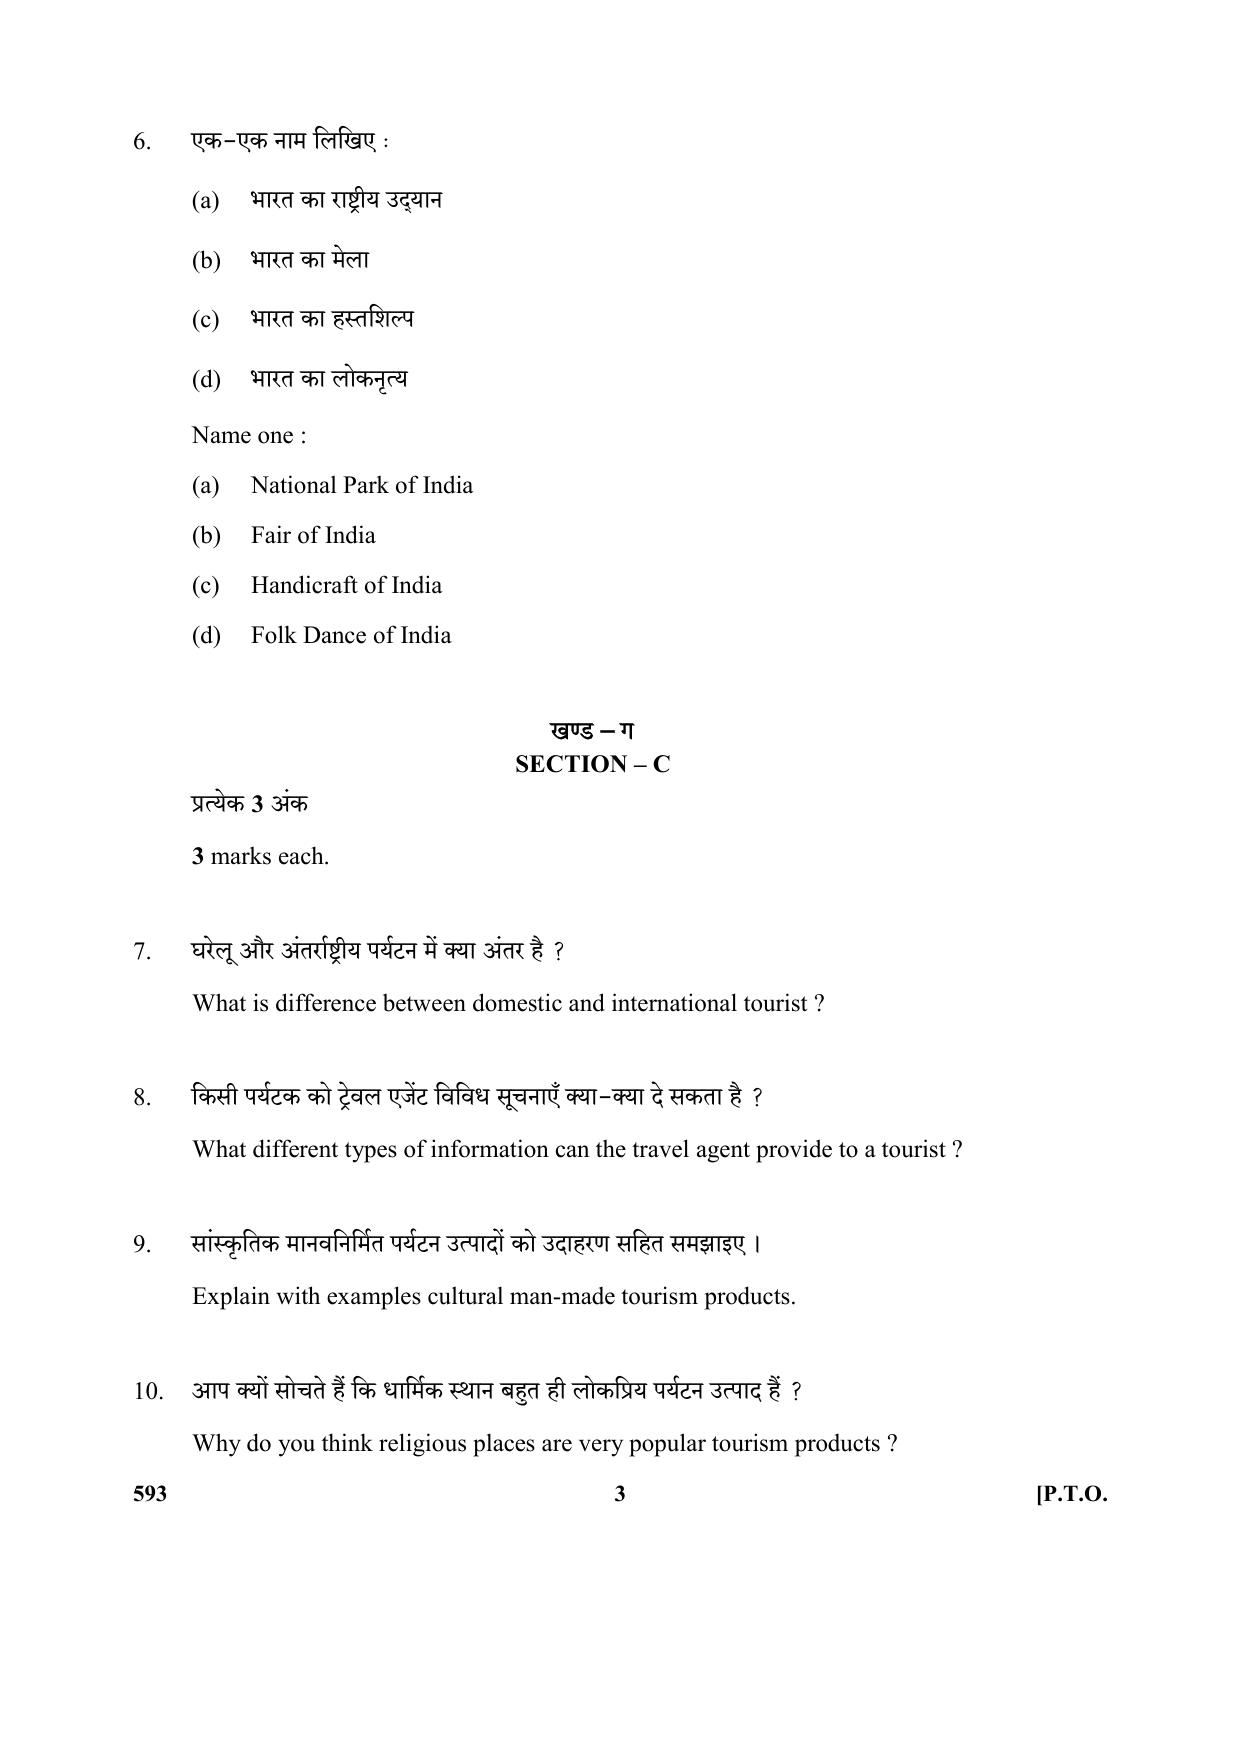 CBSE Class 10 Intro. To Tourism II_N 2017-comptt Question Paper - Page 3